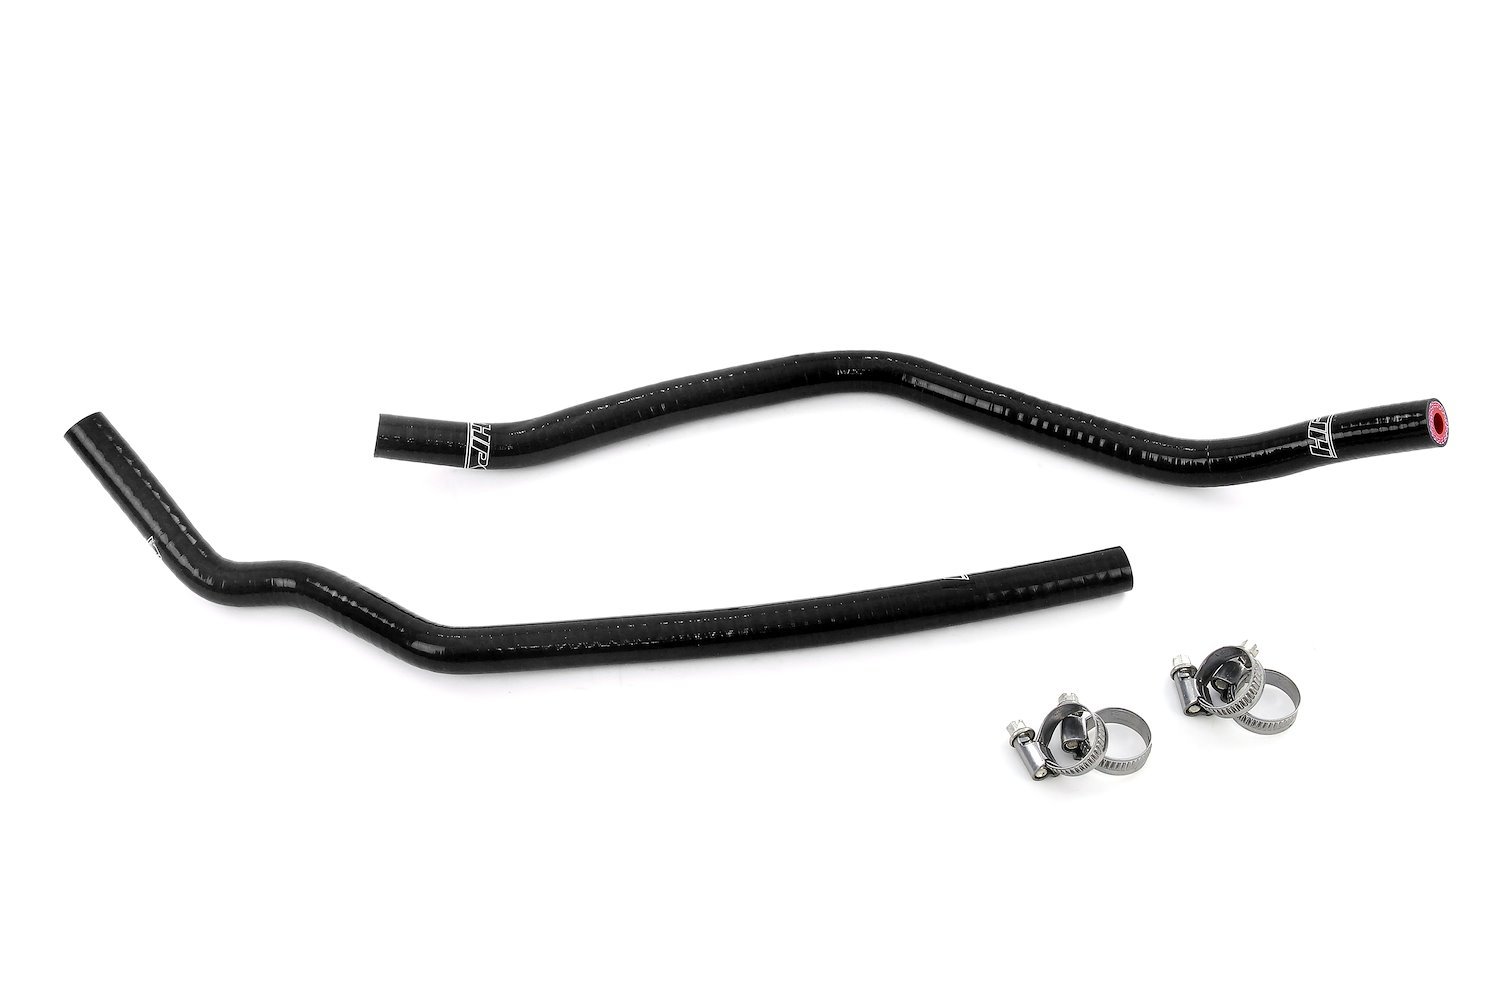 57-2119-BLK Coolant Hose Kit, 3-Ply Reinforced Silicone, Replaces Rubber Coolant Tank Supply Hoses